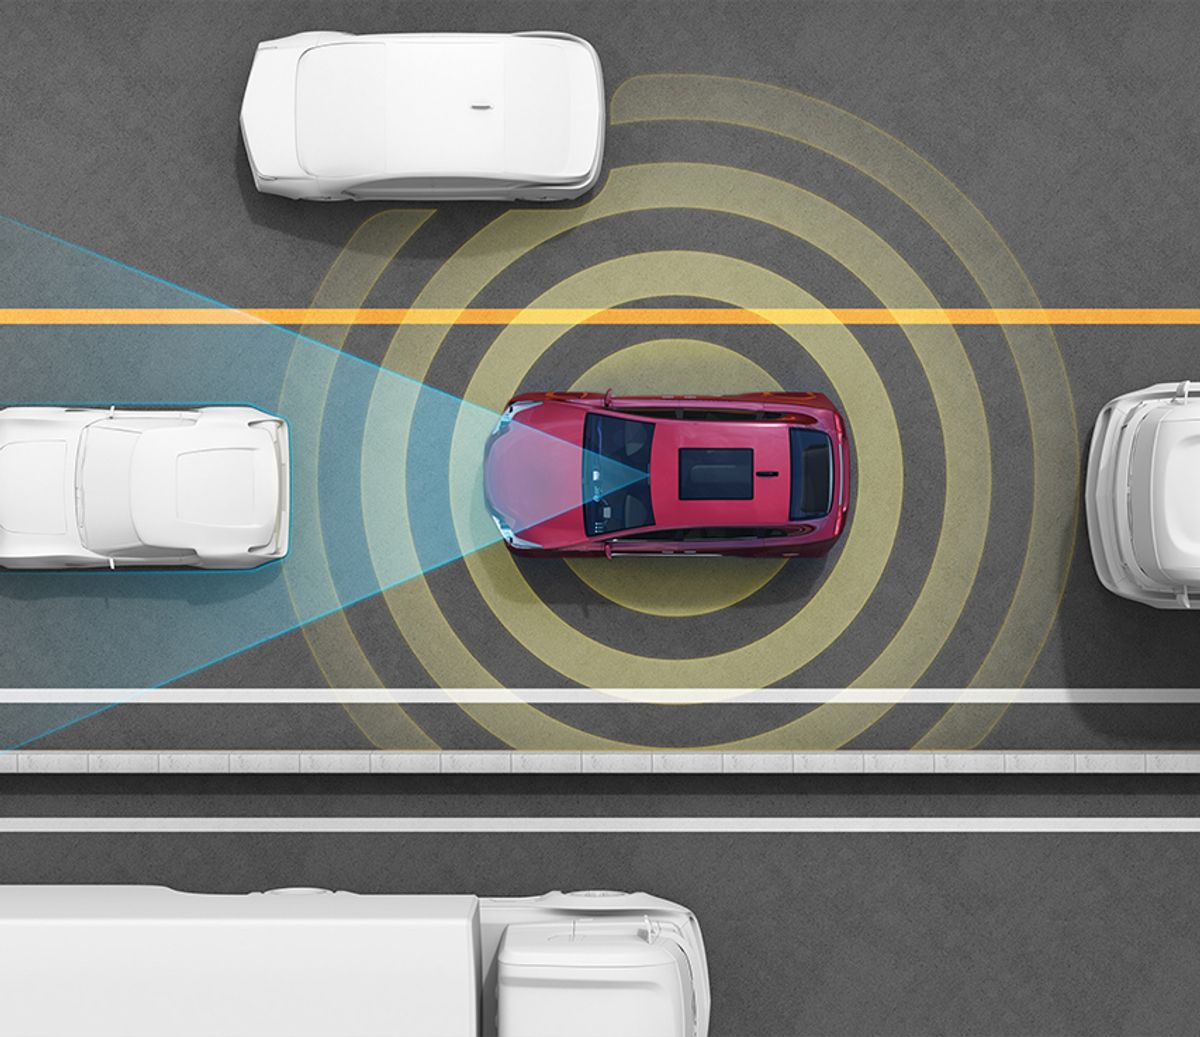 An illustration of a self-driving car with a sensor on top that is determining the location and distance of objects around the car.